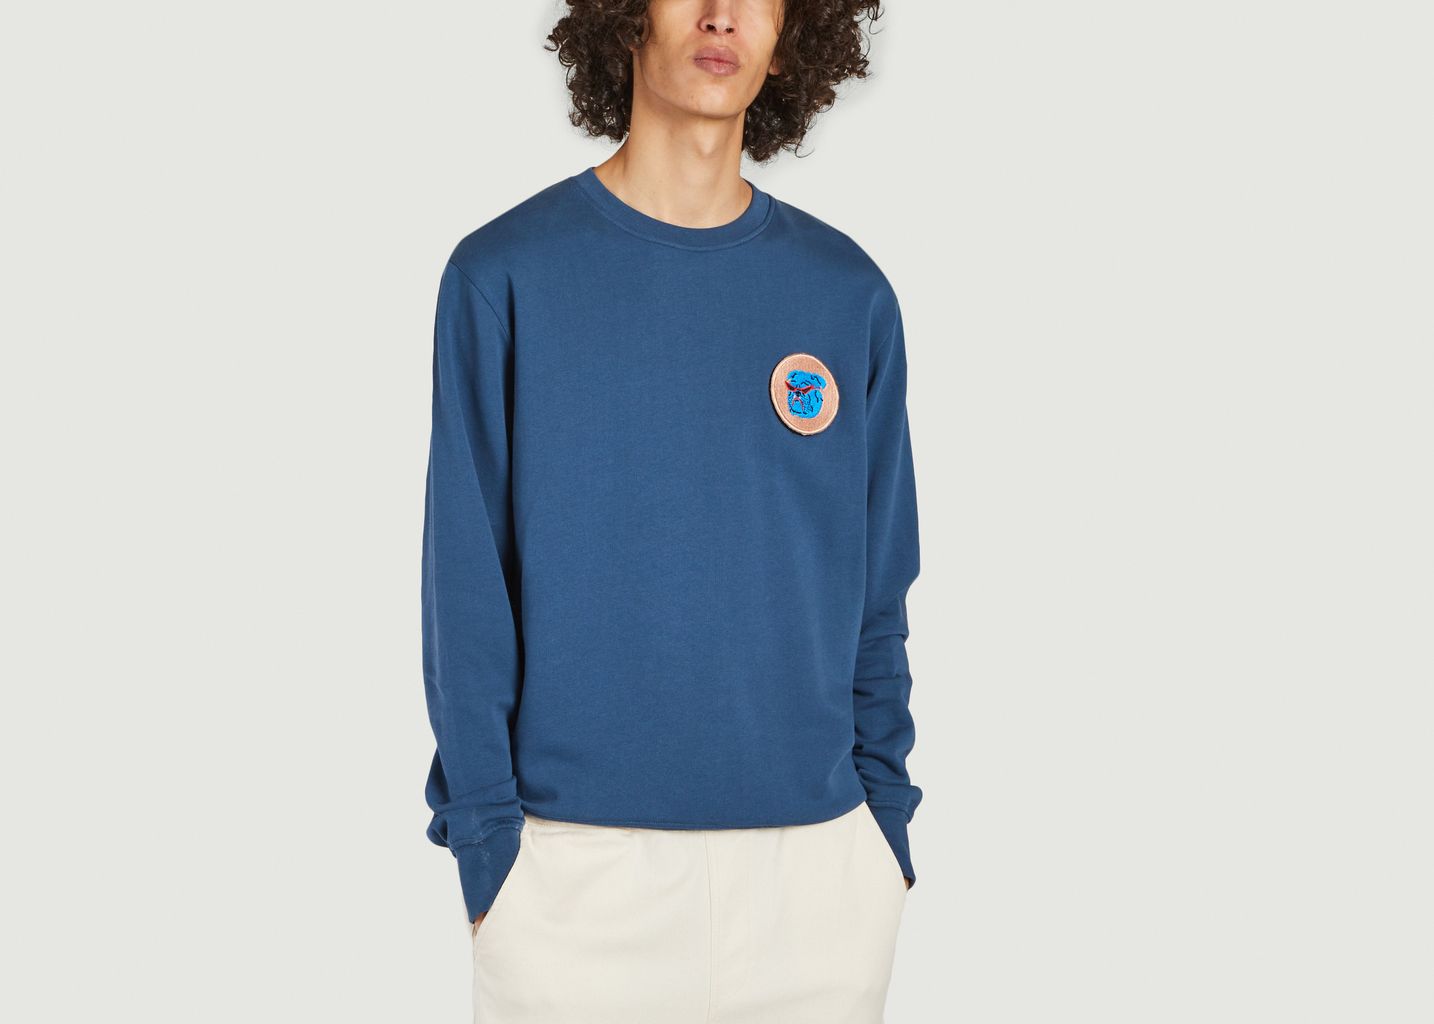 OLOW Scratchy Sweatshirt With 3 Embroidered Patches To Scratch